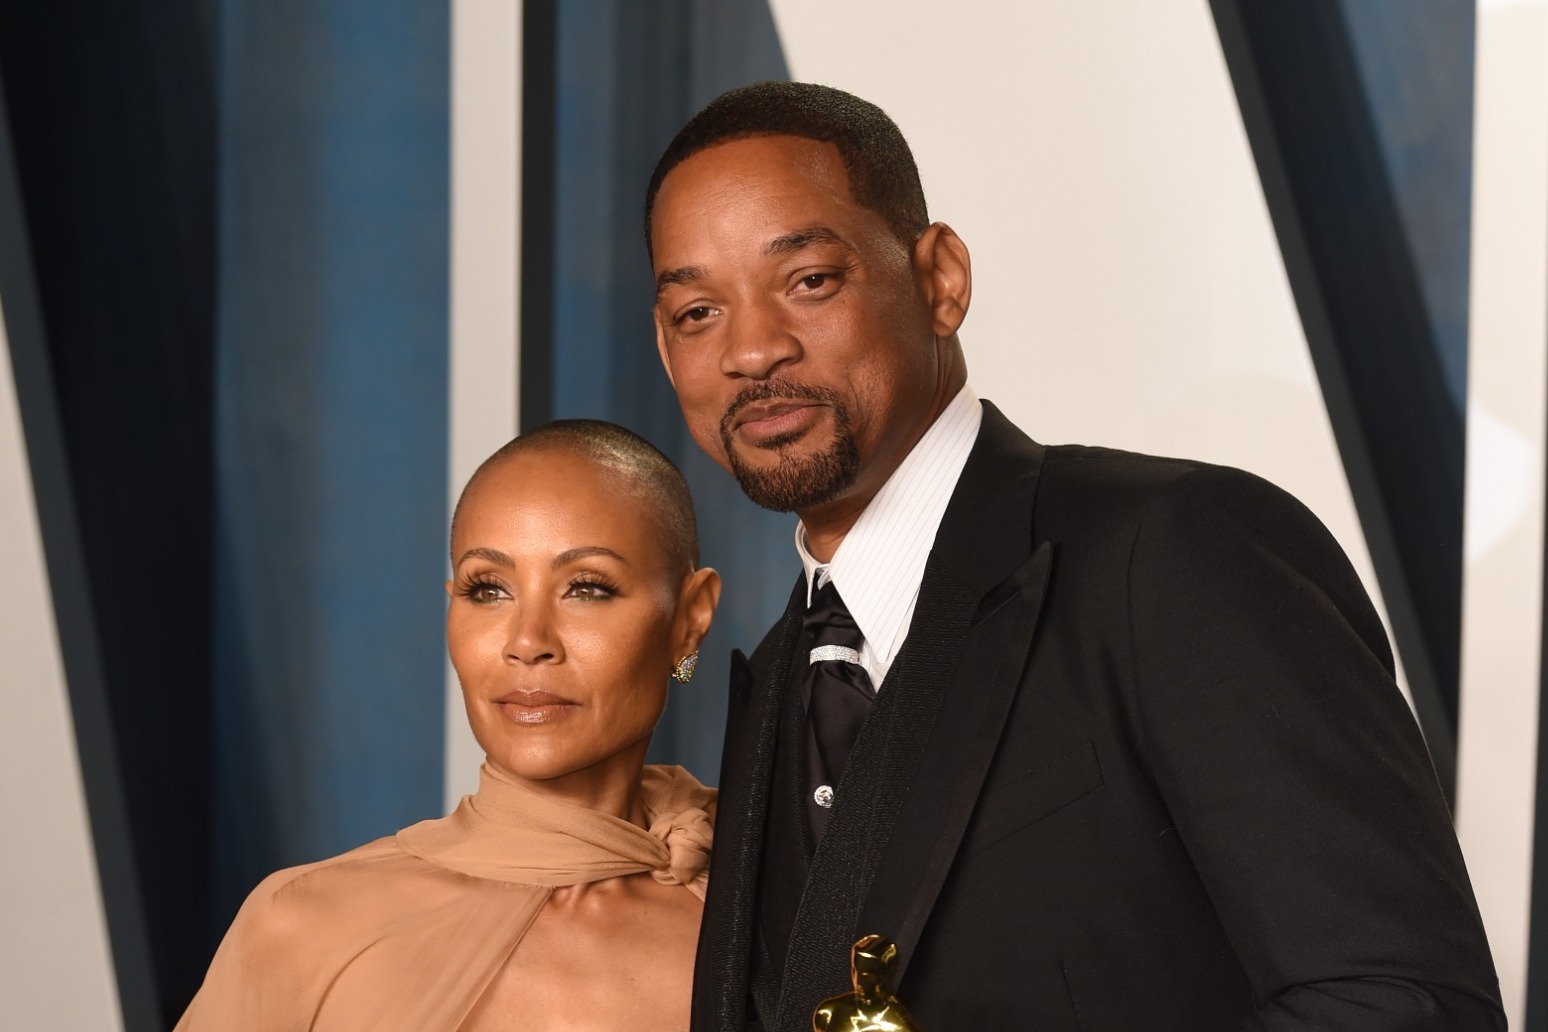 Will Smith banned from all Academy events for 10 years following Oscars slap 